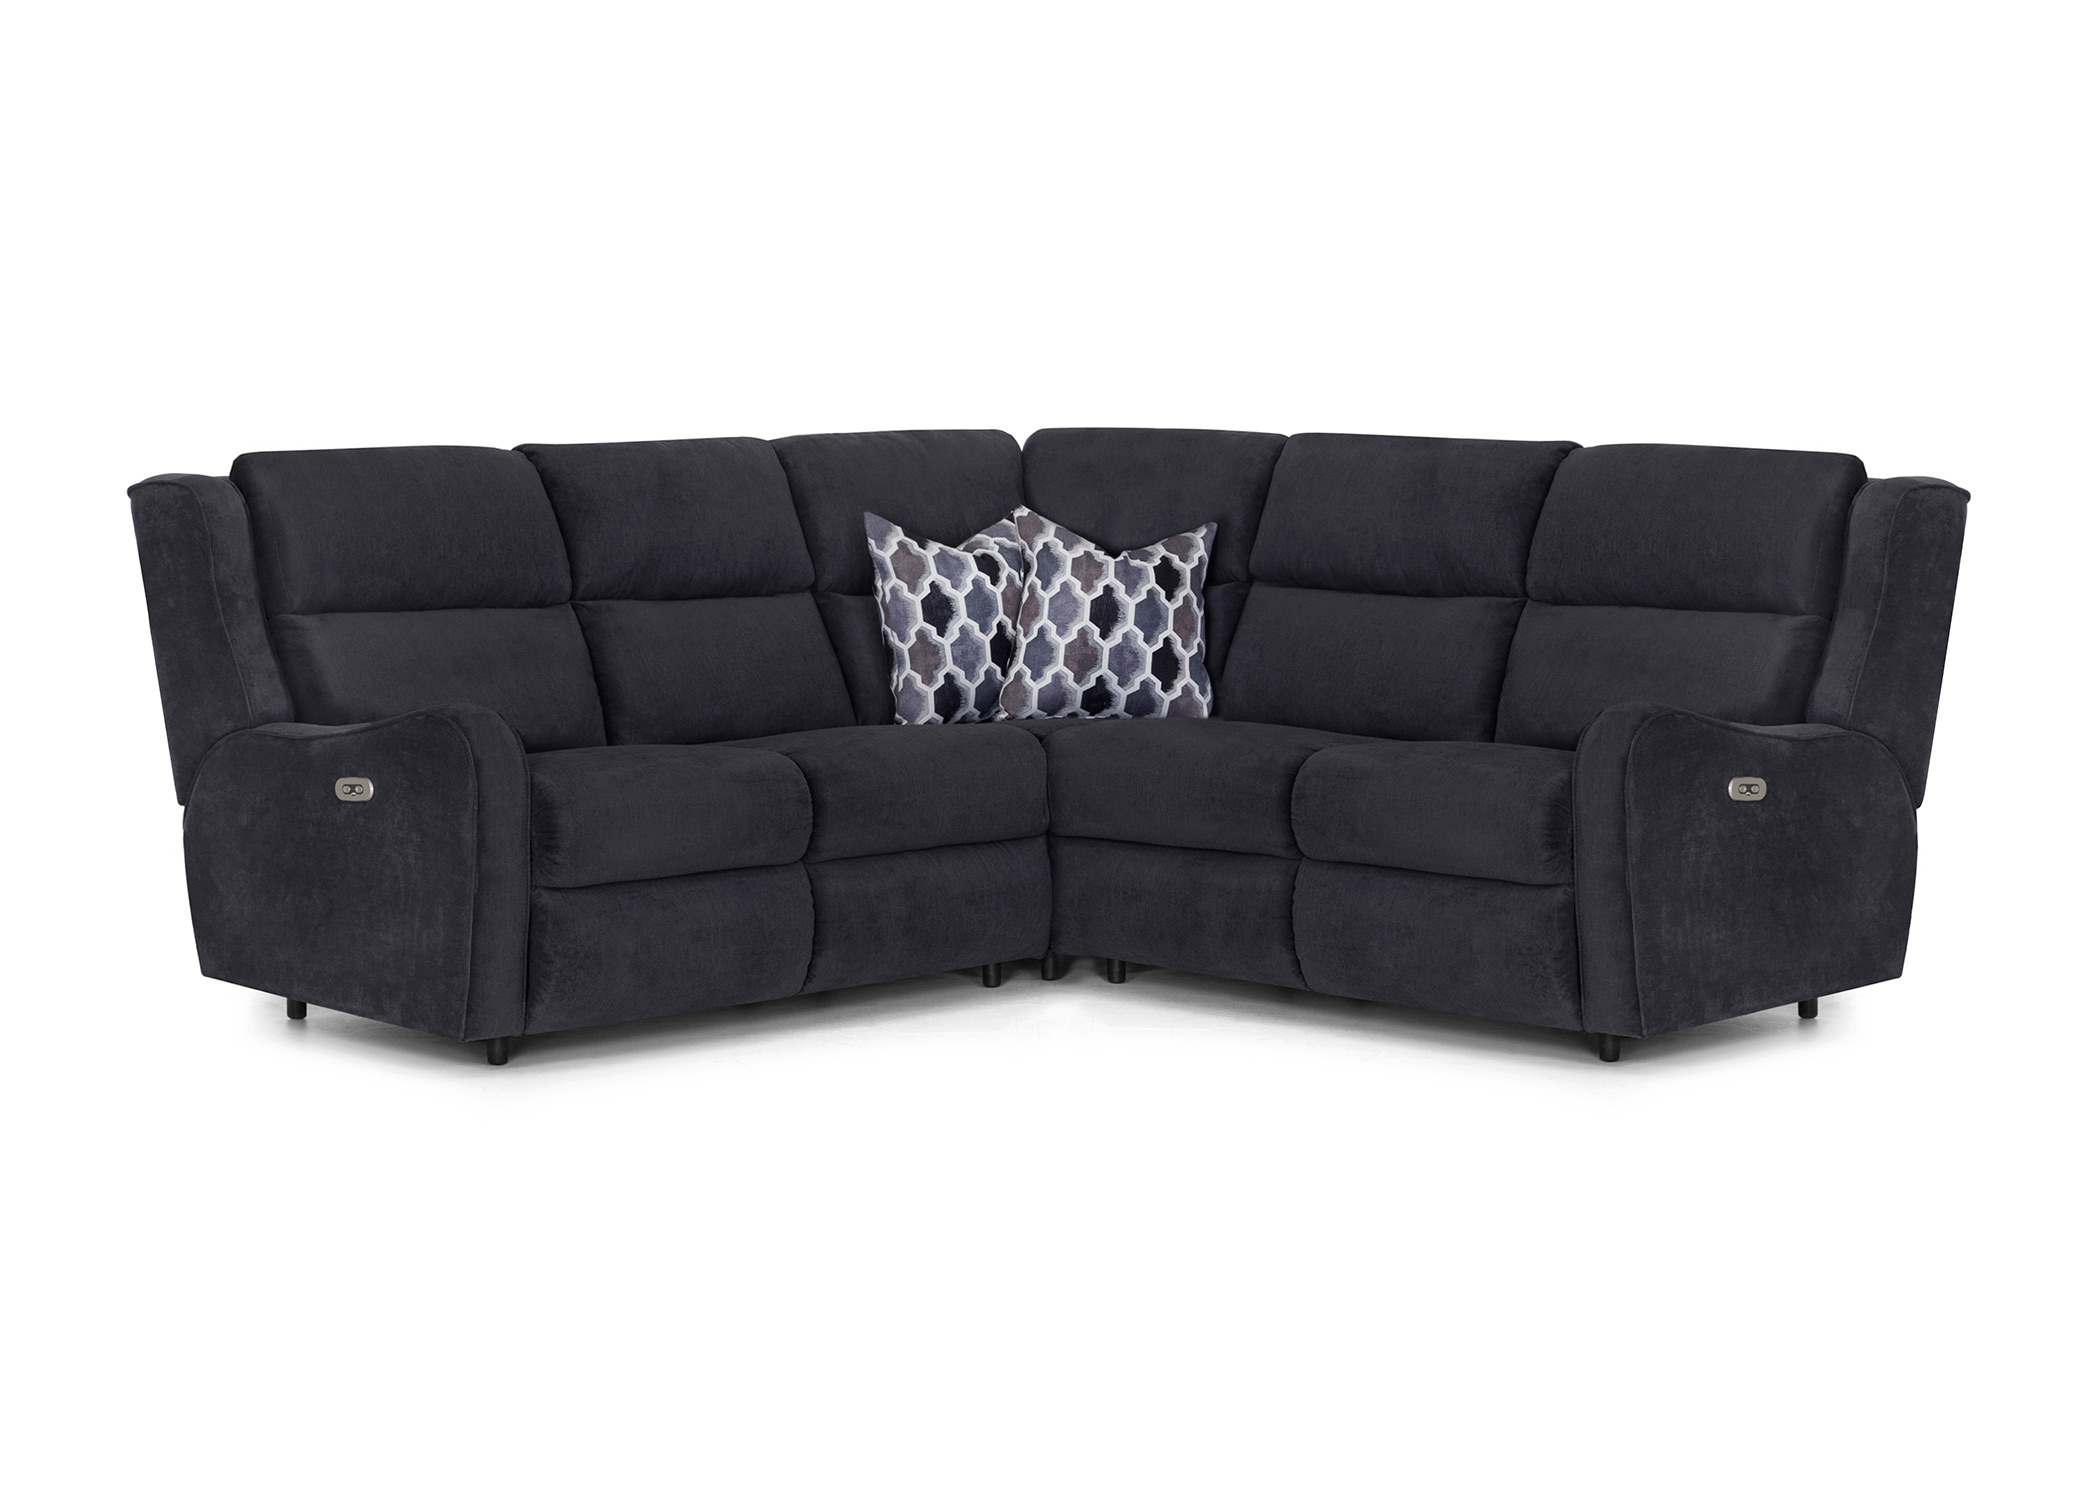  560 Theory 3 PC Sectional 